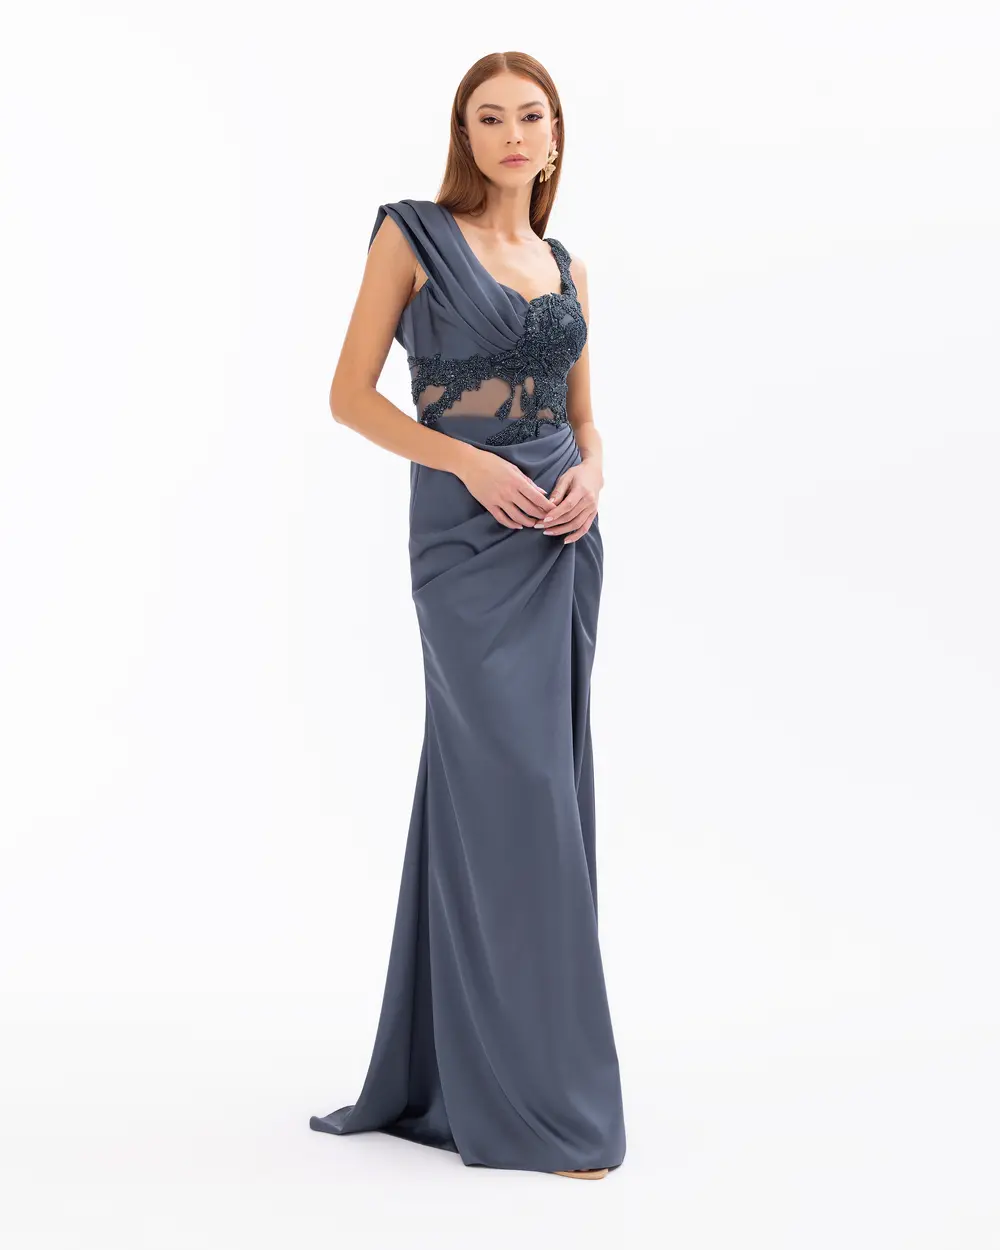 Slit Fish Form Evening Dress with Indian Accessories